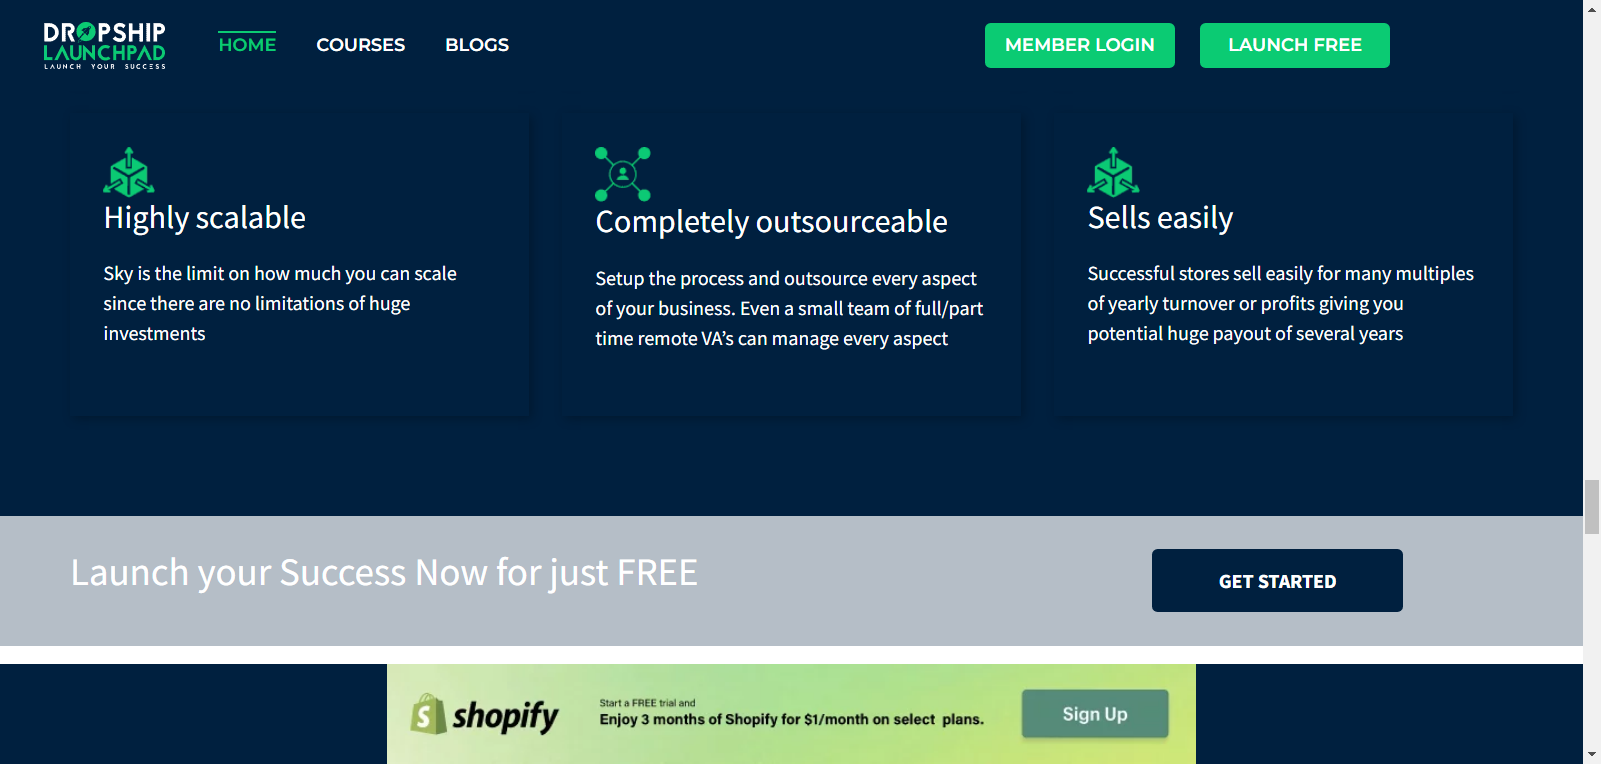 What are the DROPSHIP LAUNCHPADTurnkey Shopify store providers?